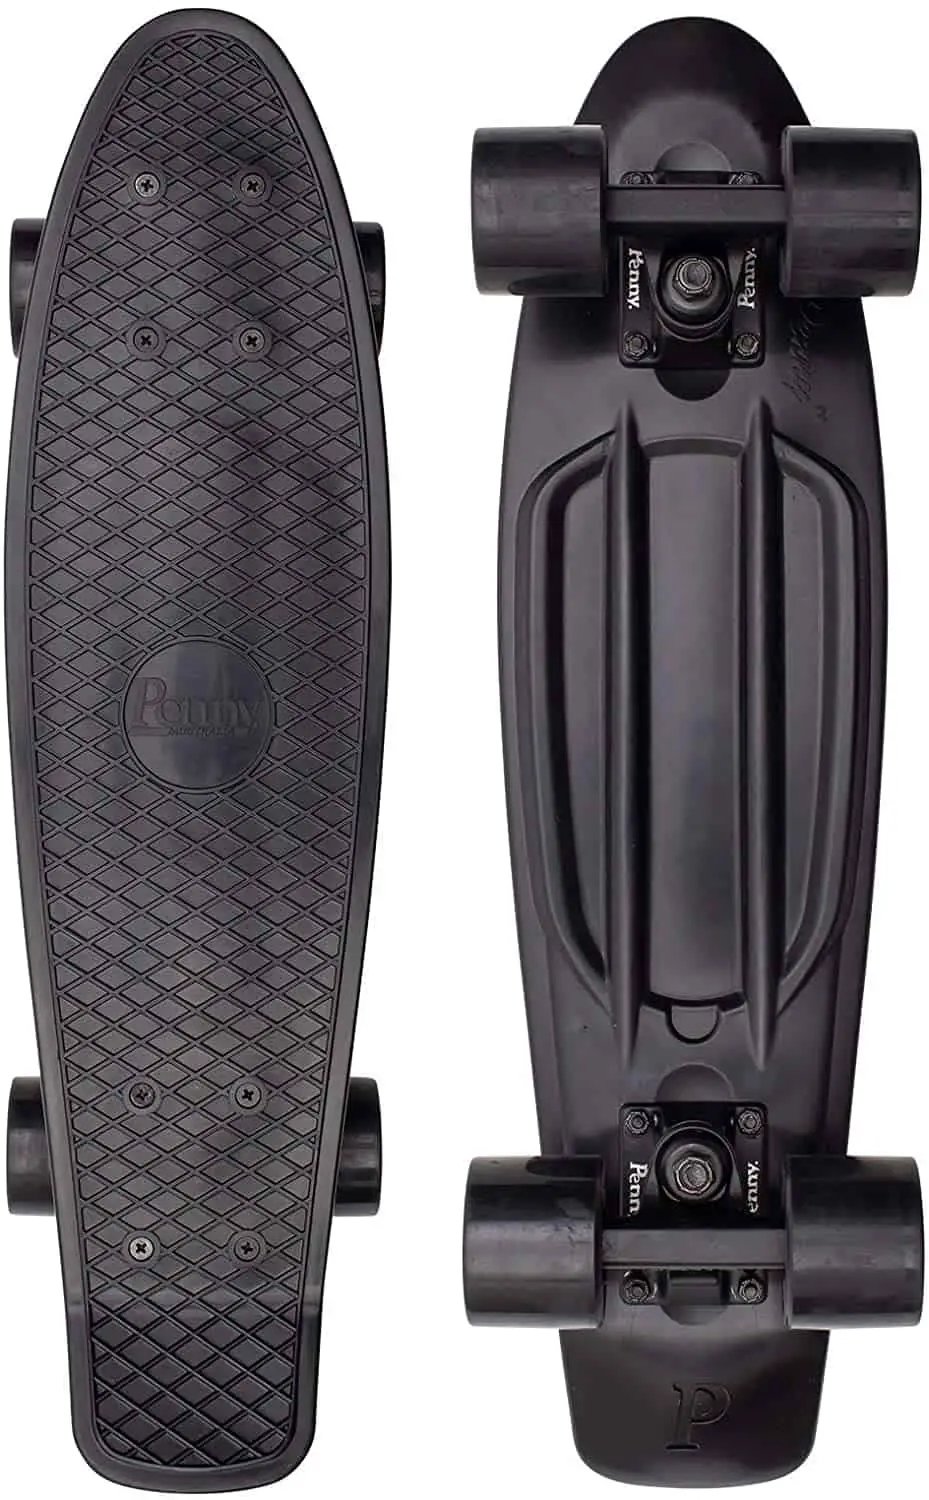 Penny Classic Complete Skateboard